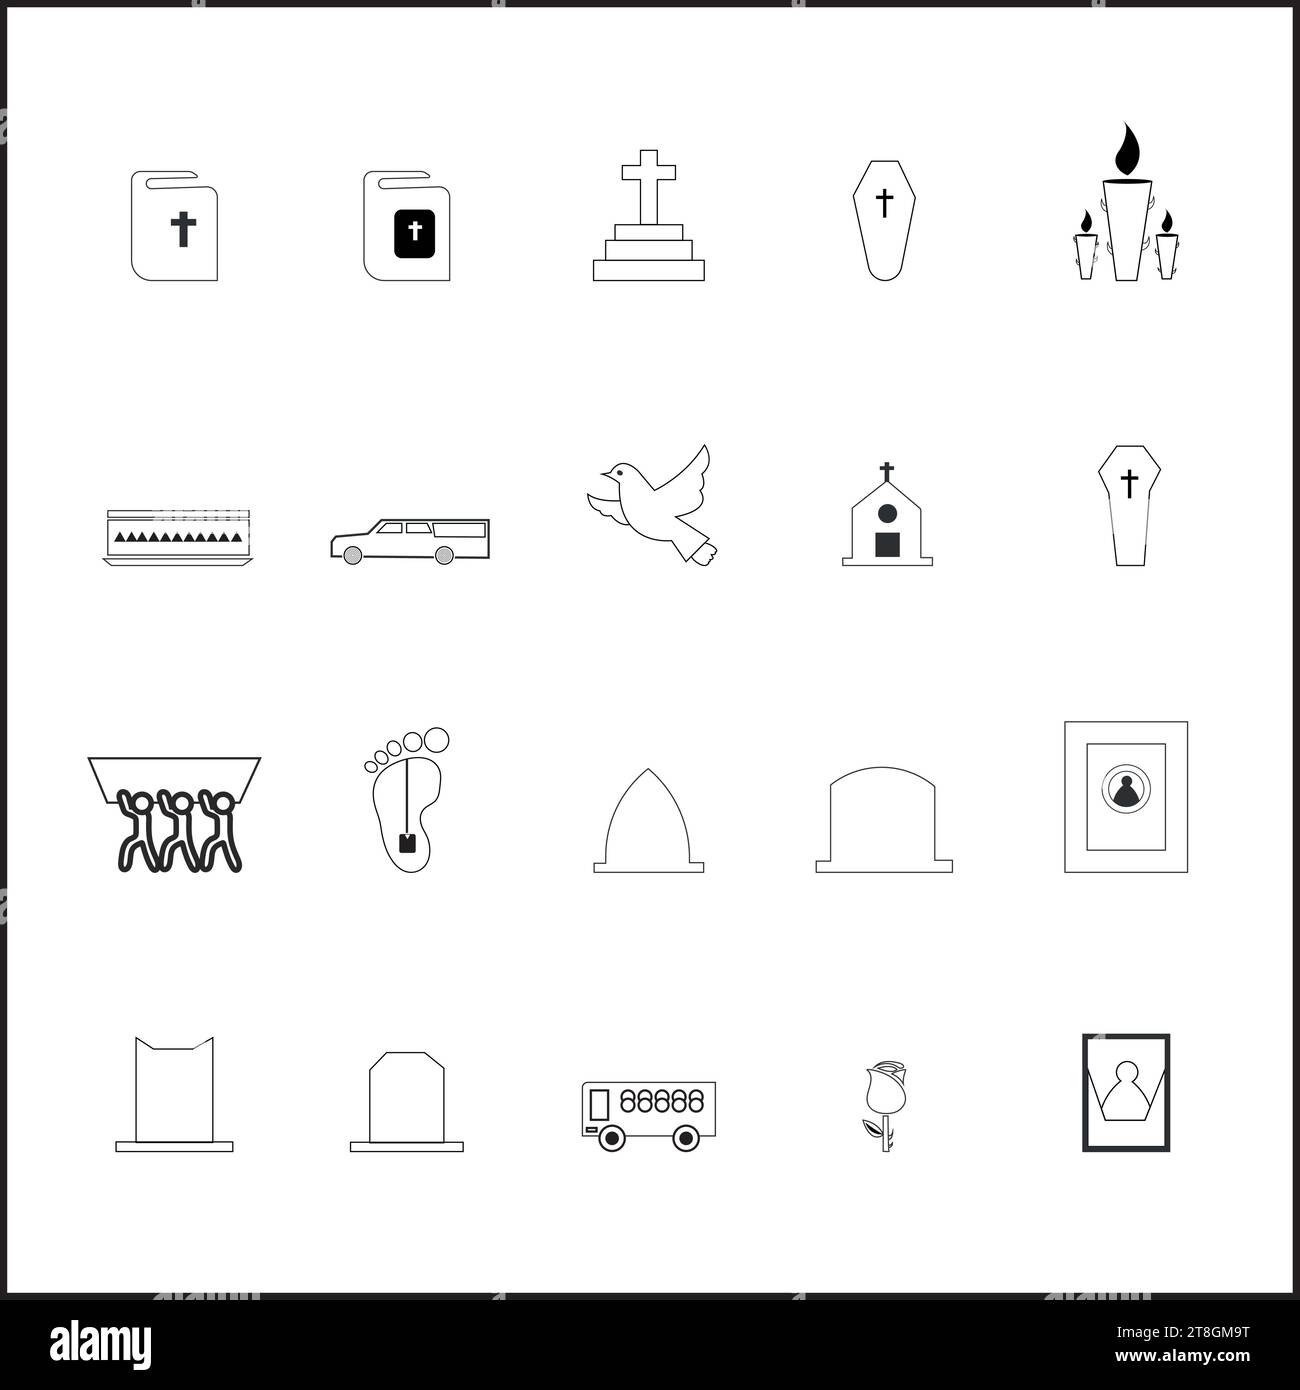 Funeral Directors Logo Line Icons Design. Simple line art style icons pack for Funeral Services. Vector illustration Stock Vector